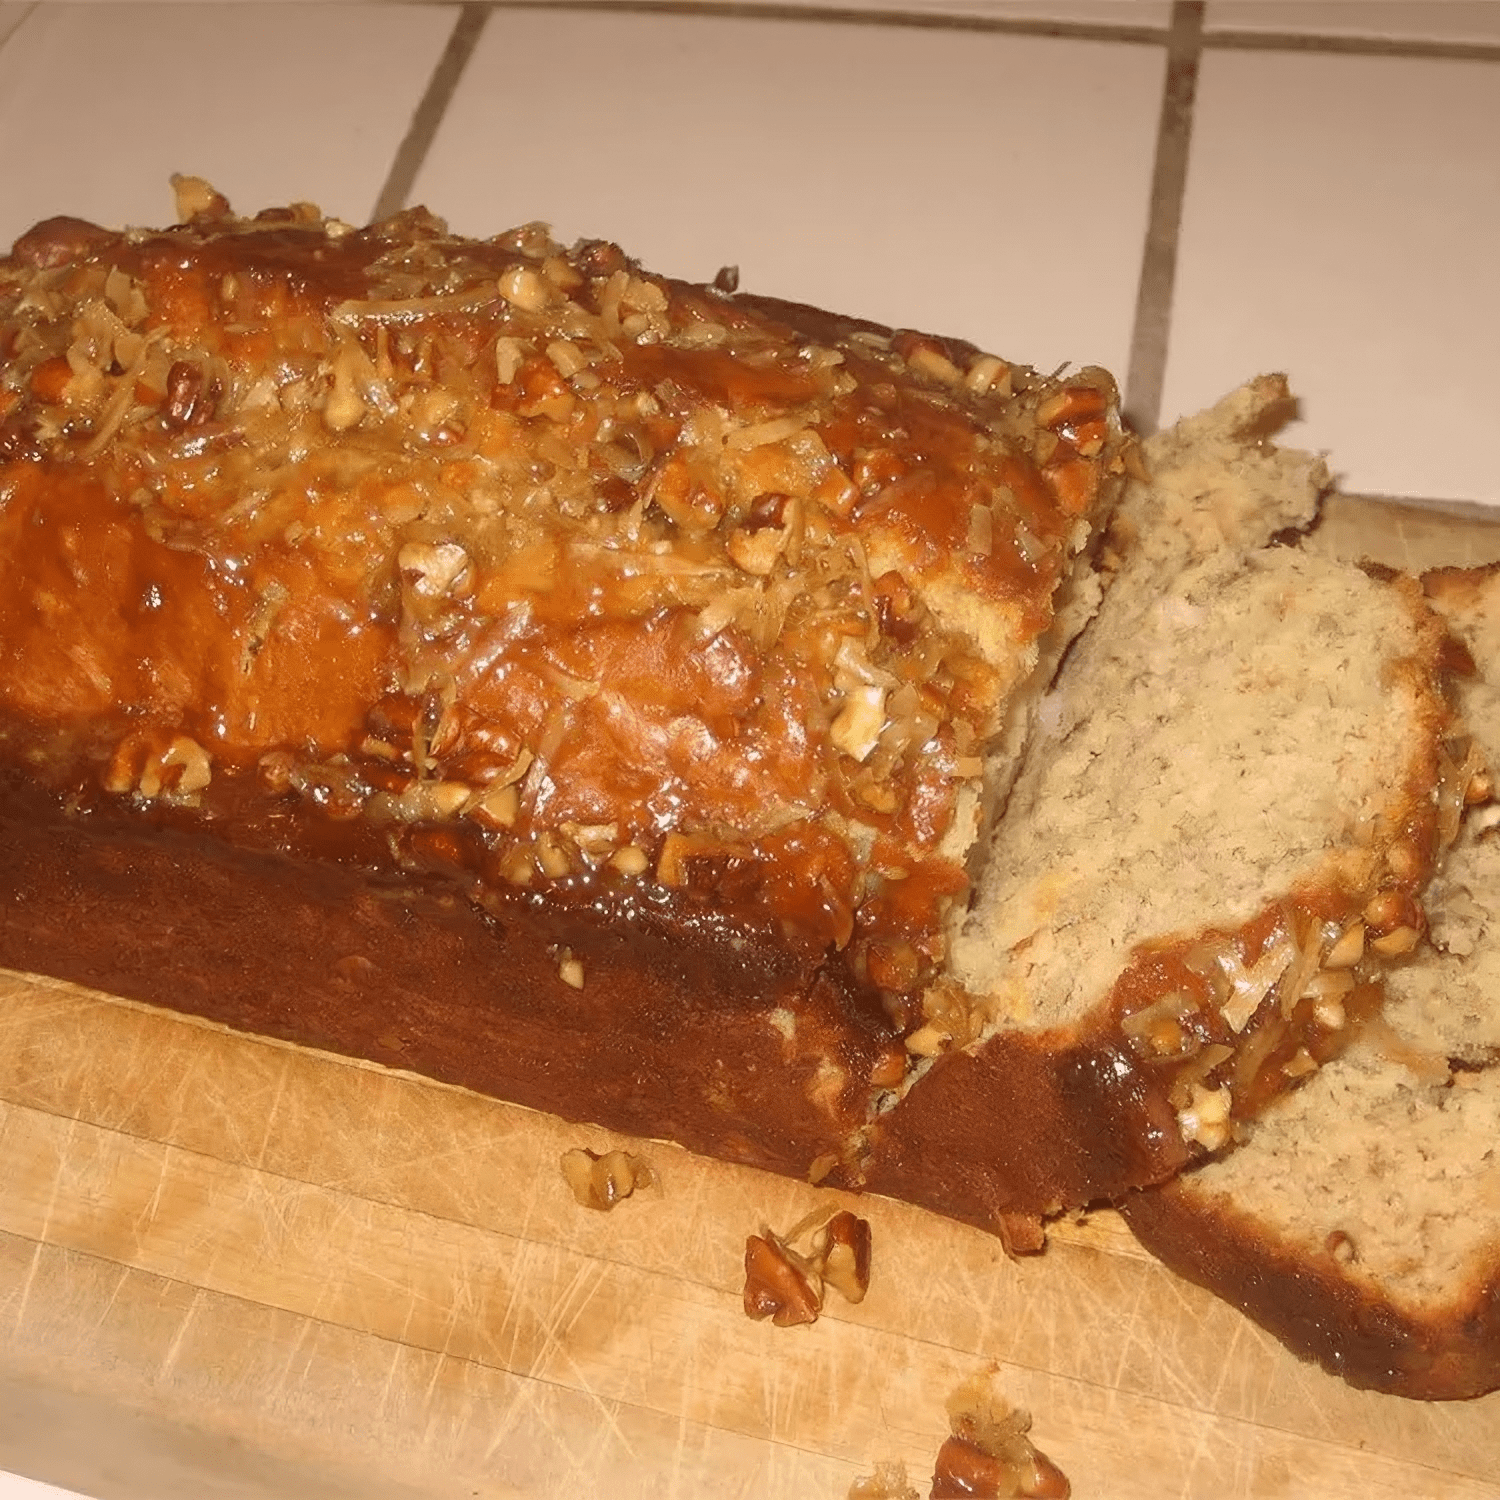 A neighbor treated me with a piece of this Jamaican Banana Bread. I share the recipe with you!